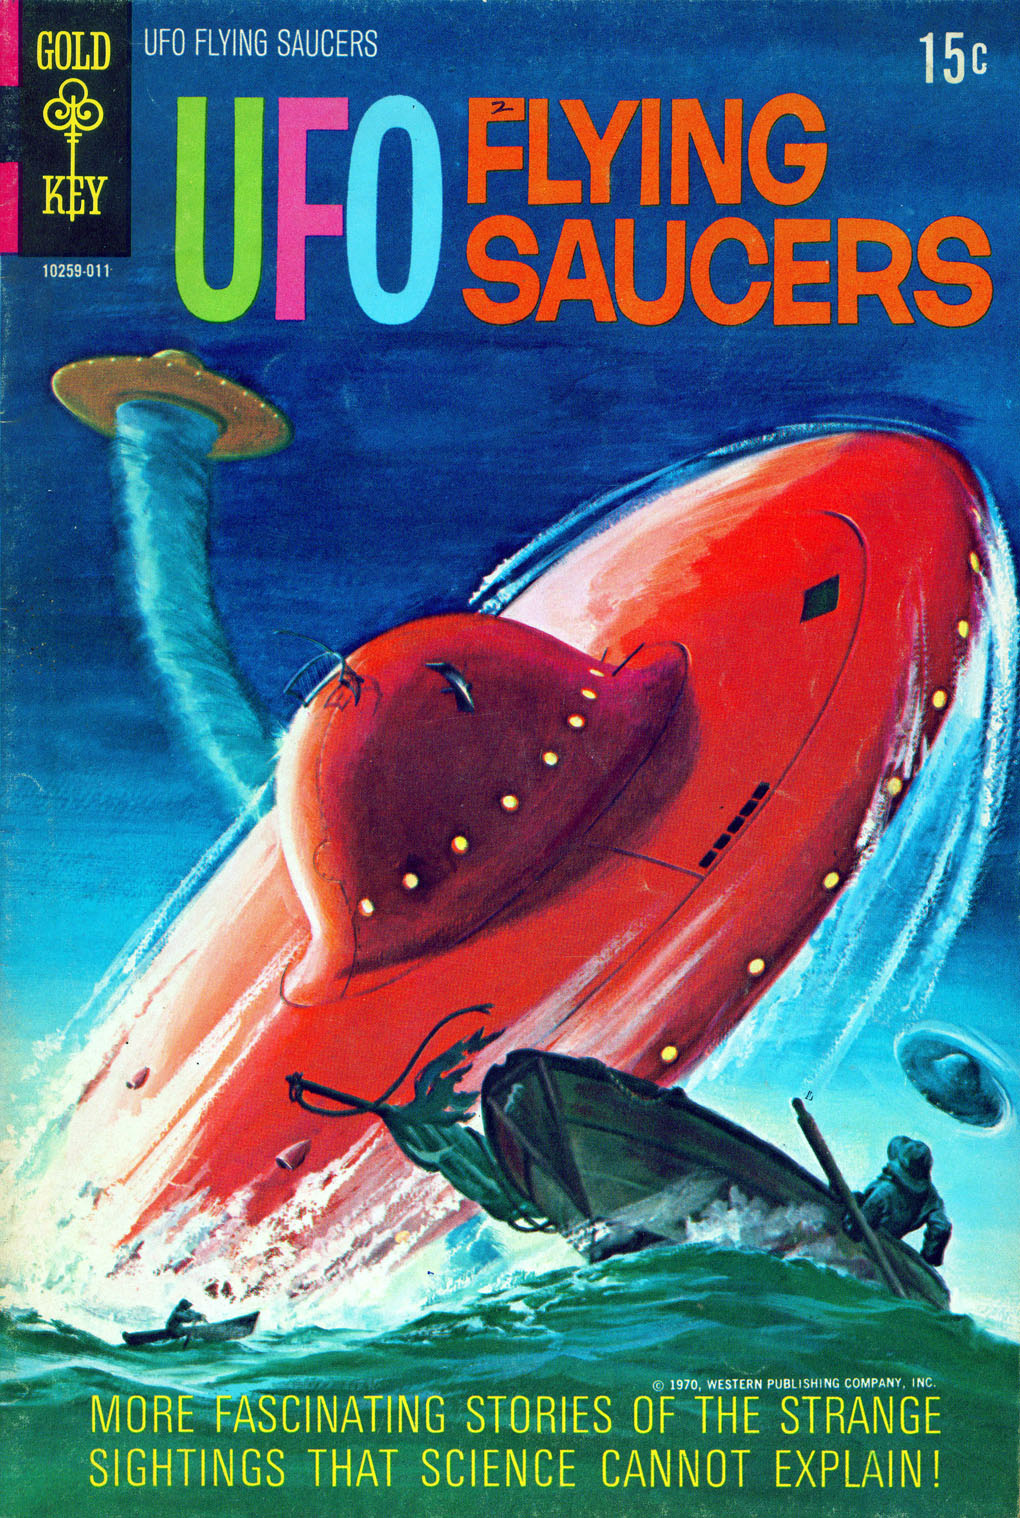 UFO FLYING SAUCERS